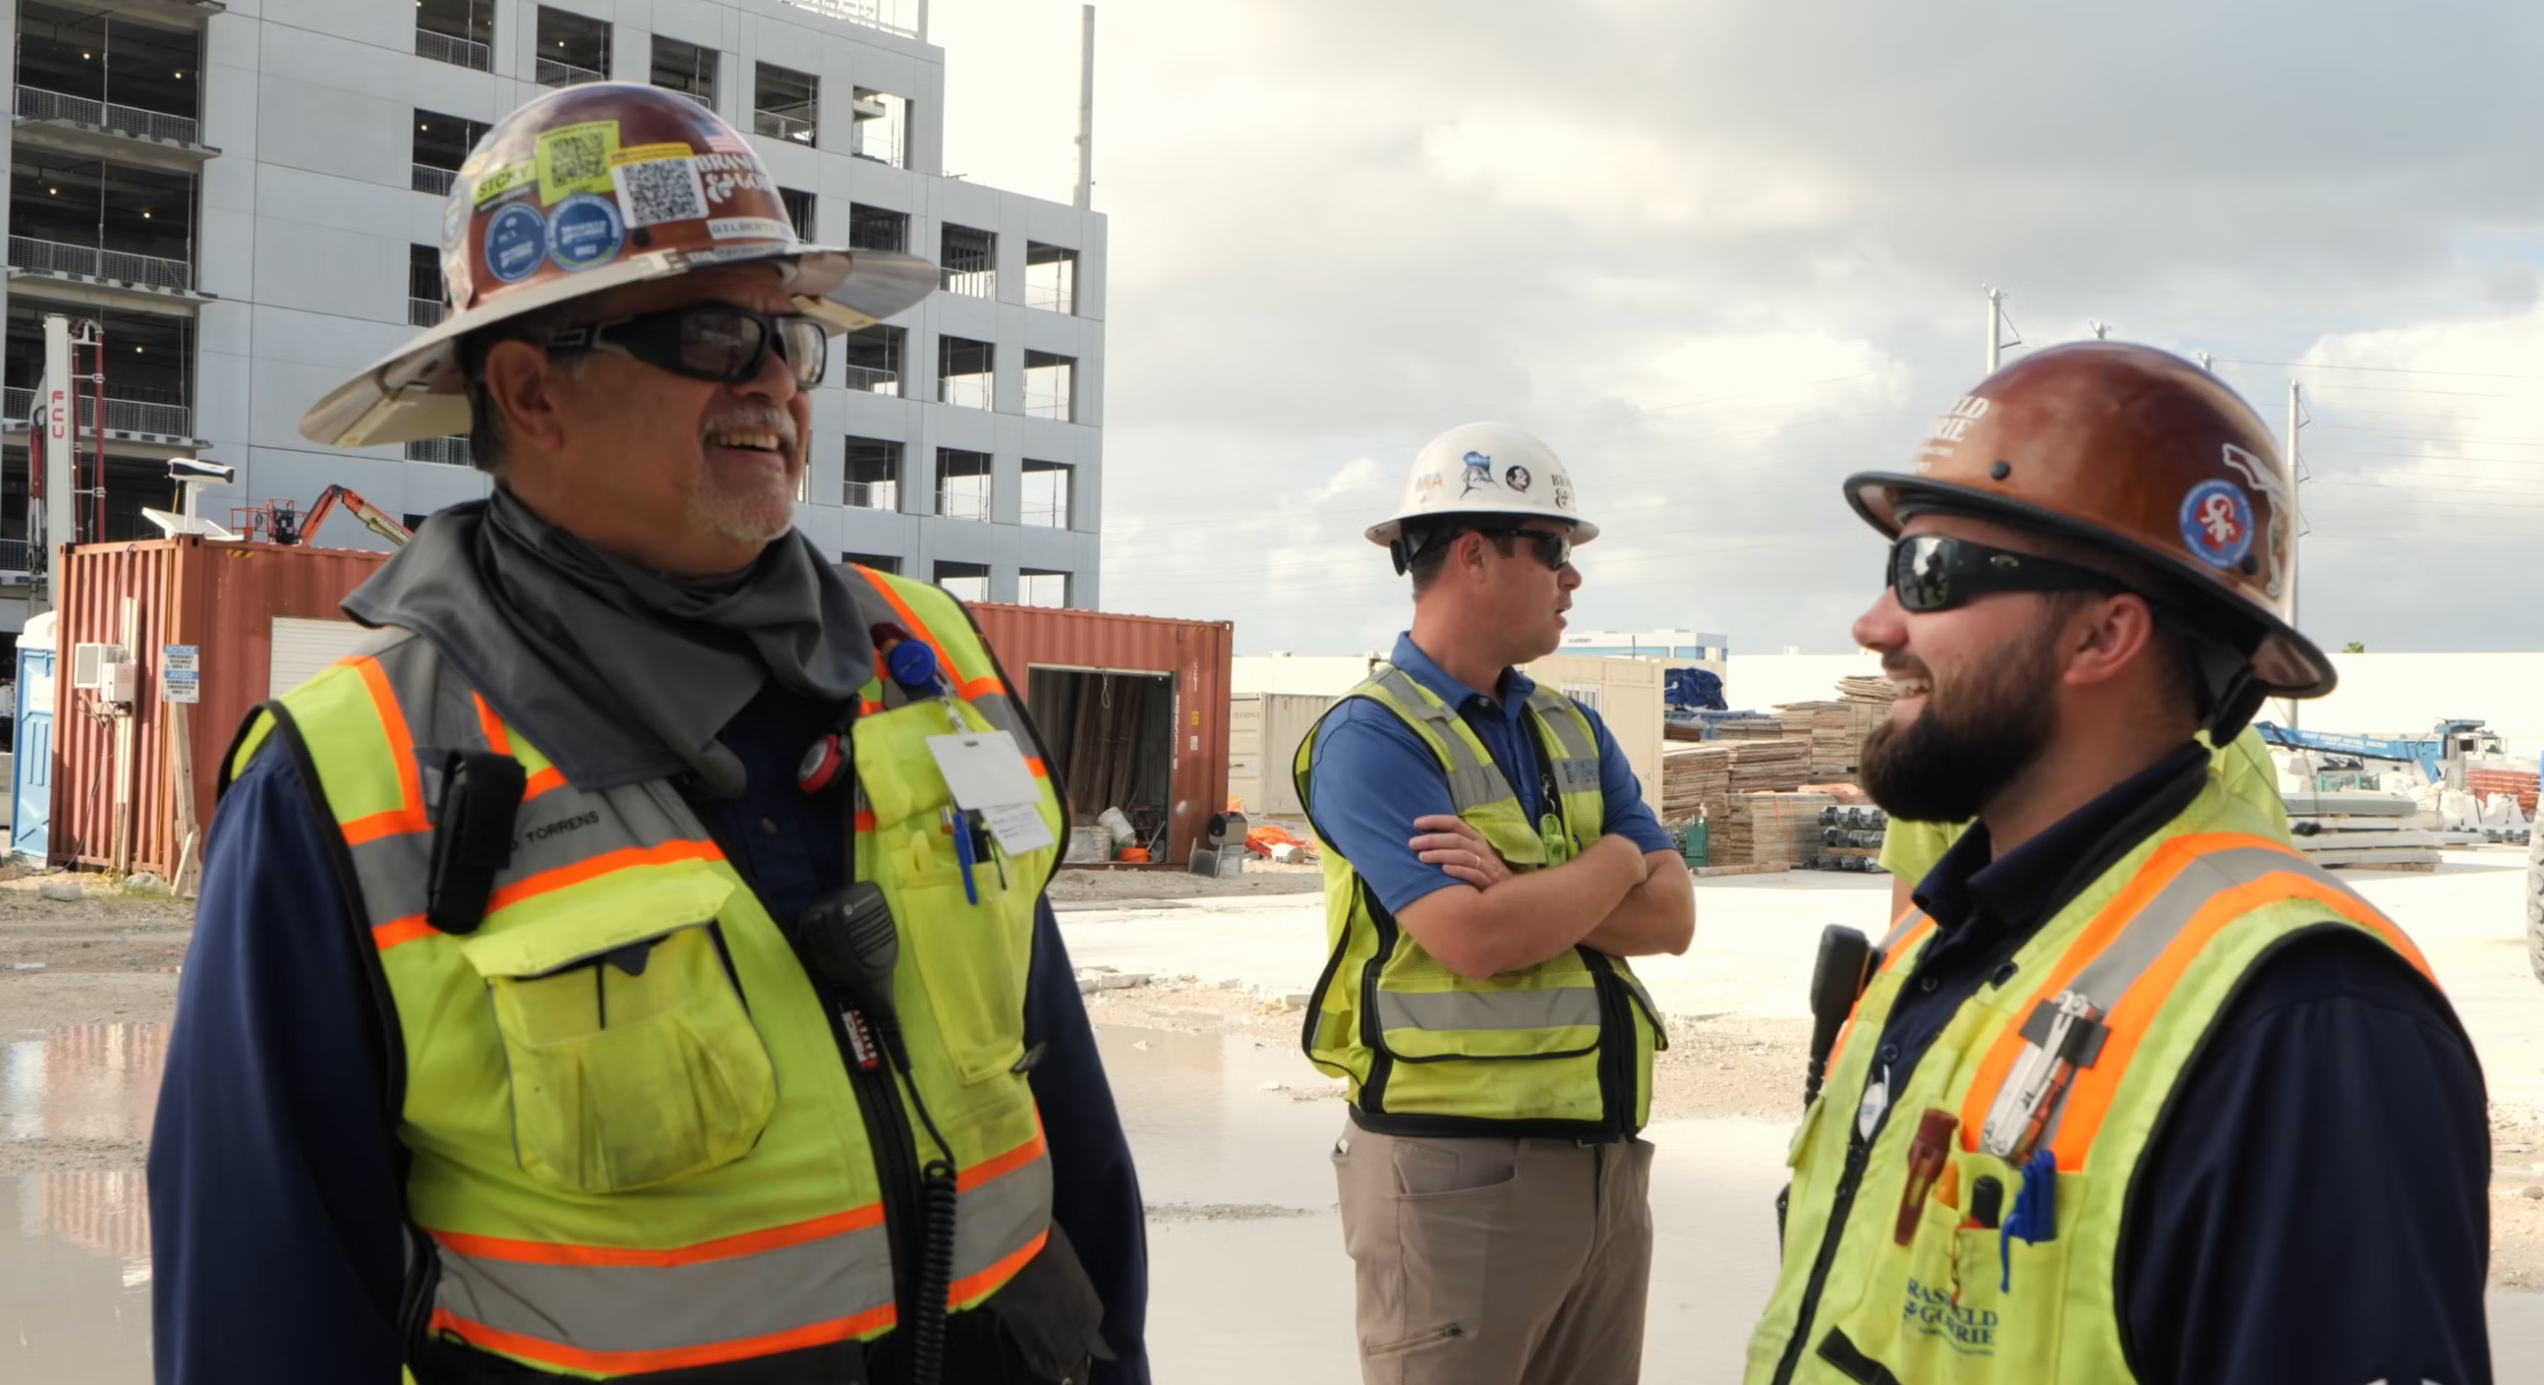 Three construction workers in safety gear discuss employment opportunities on site.